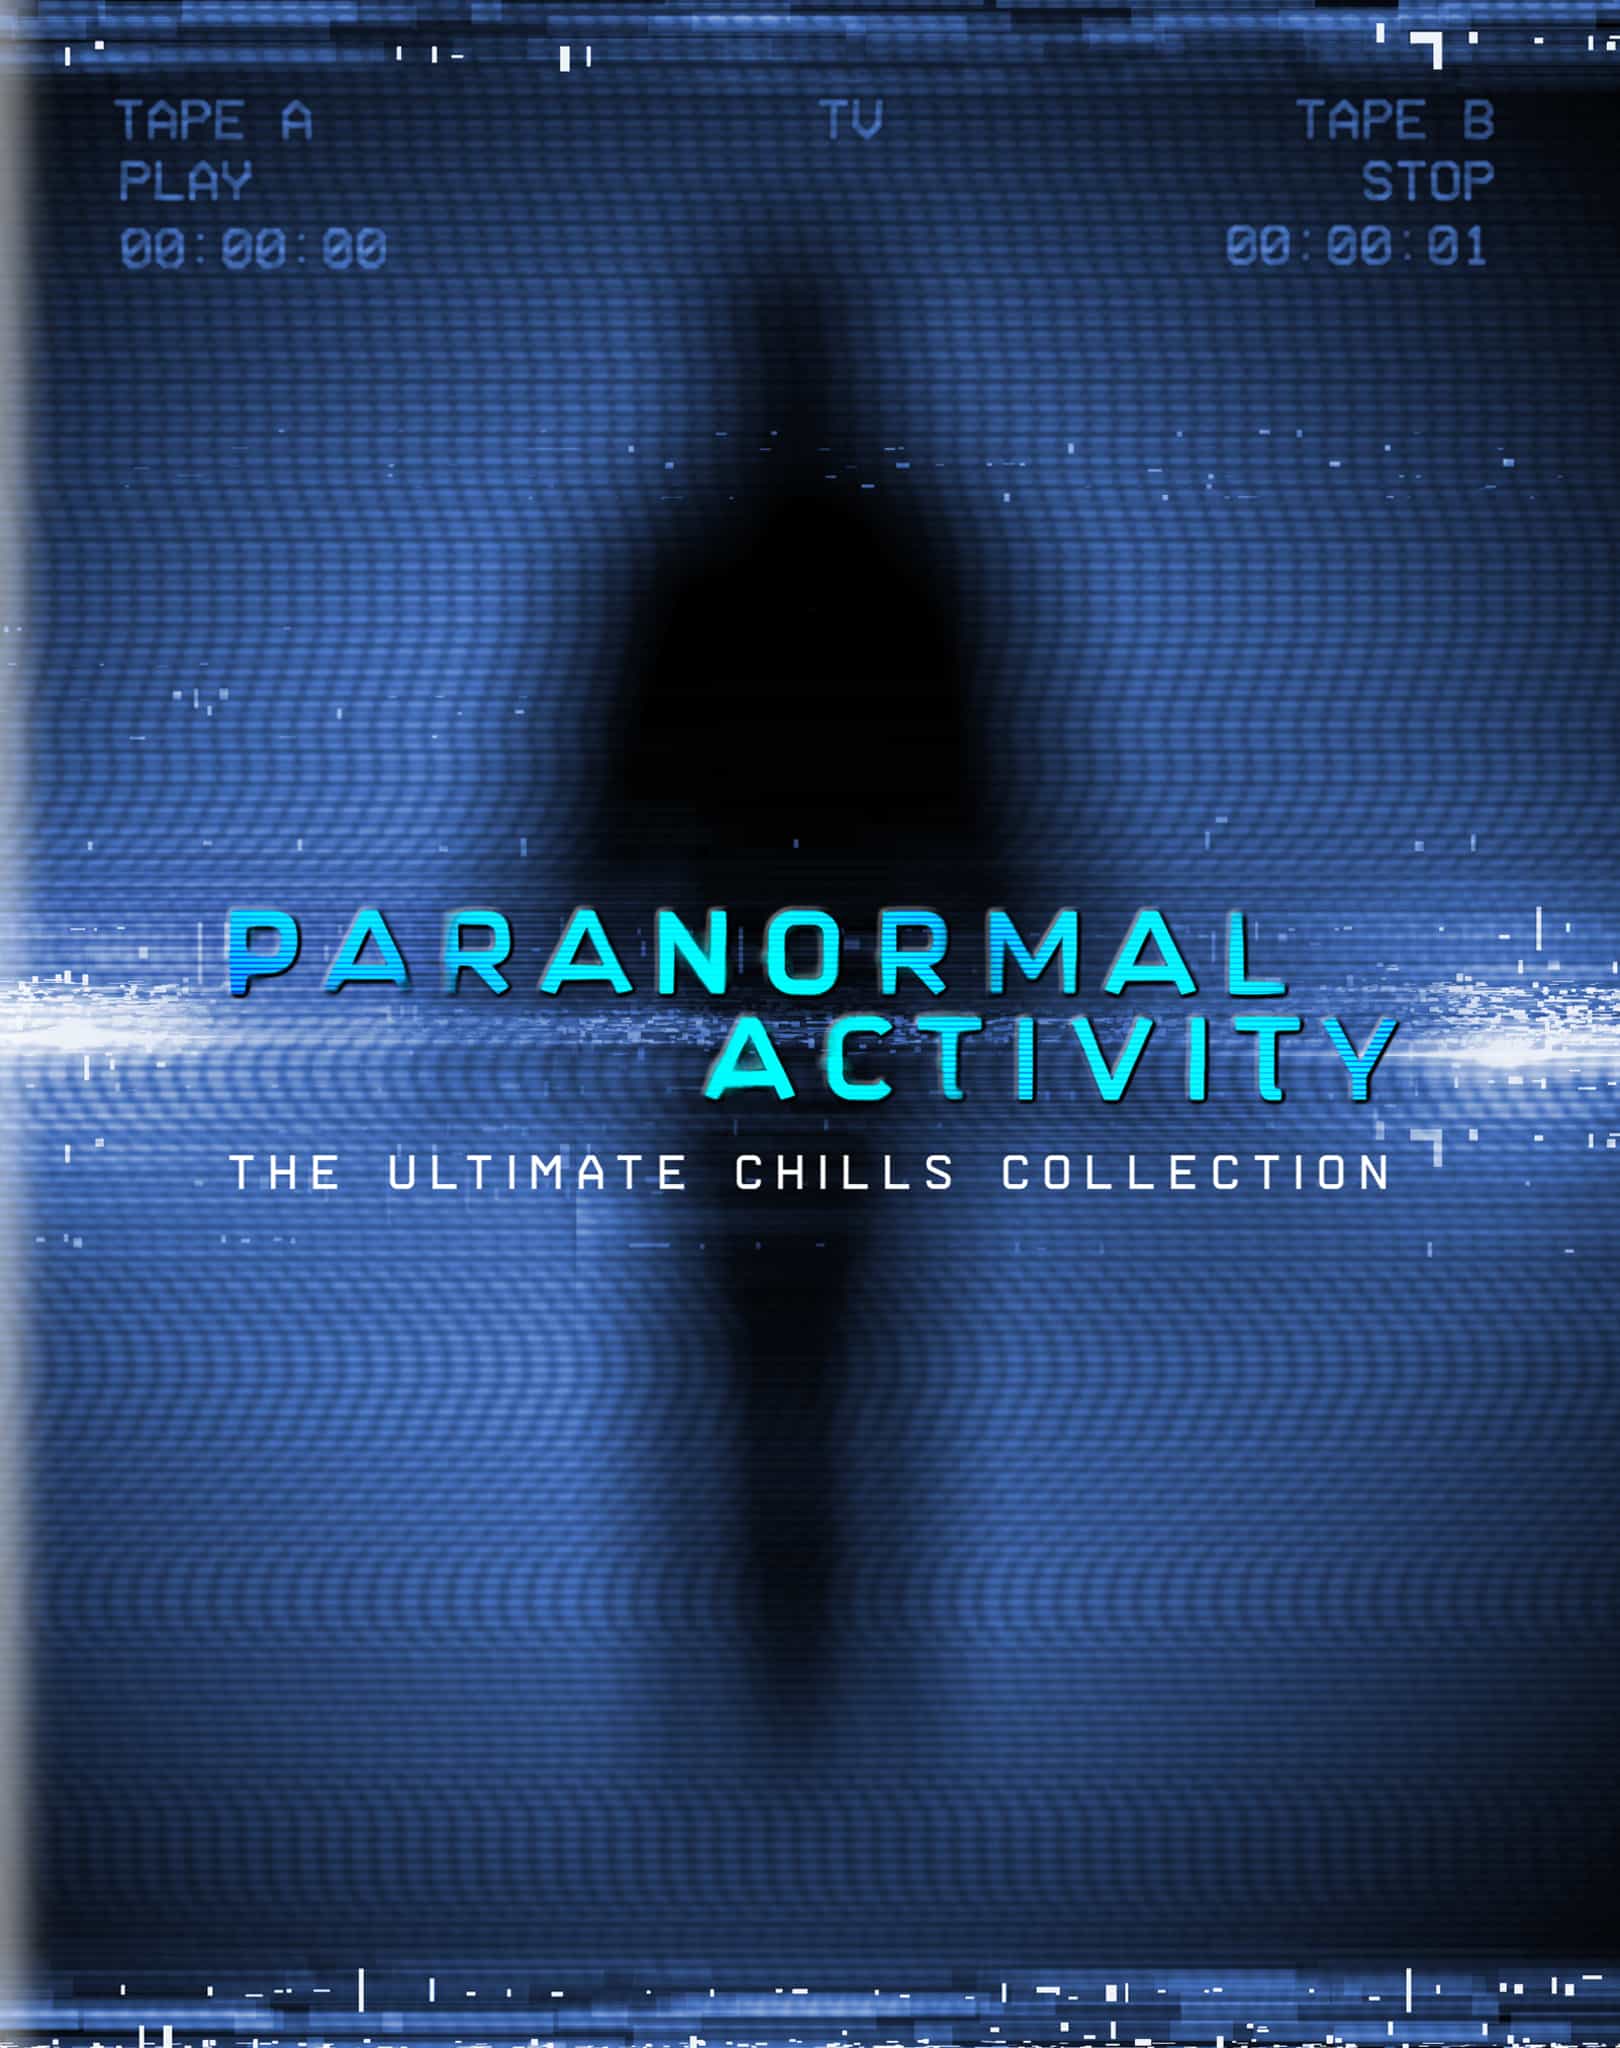 Paranormal Activity: The Ultimate Chills arrives on Blu-ray this October 11th 18